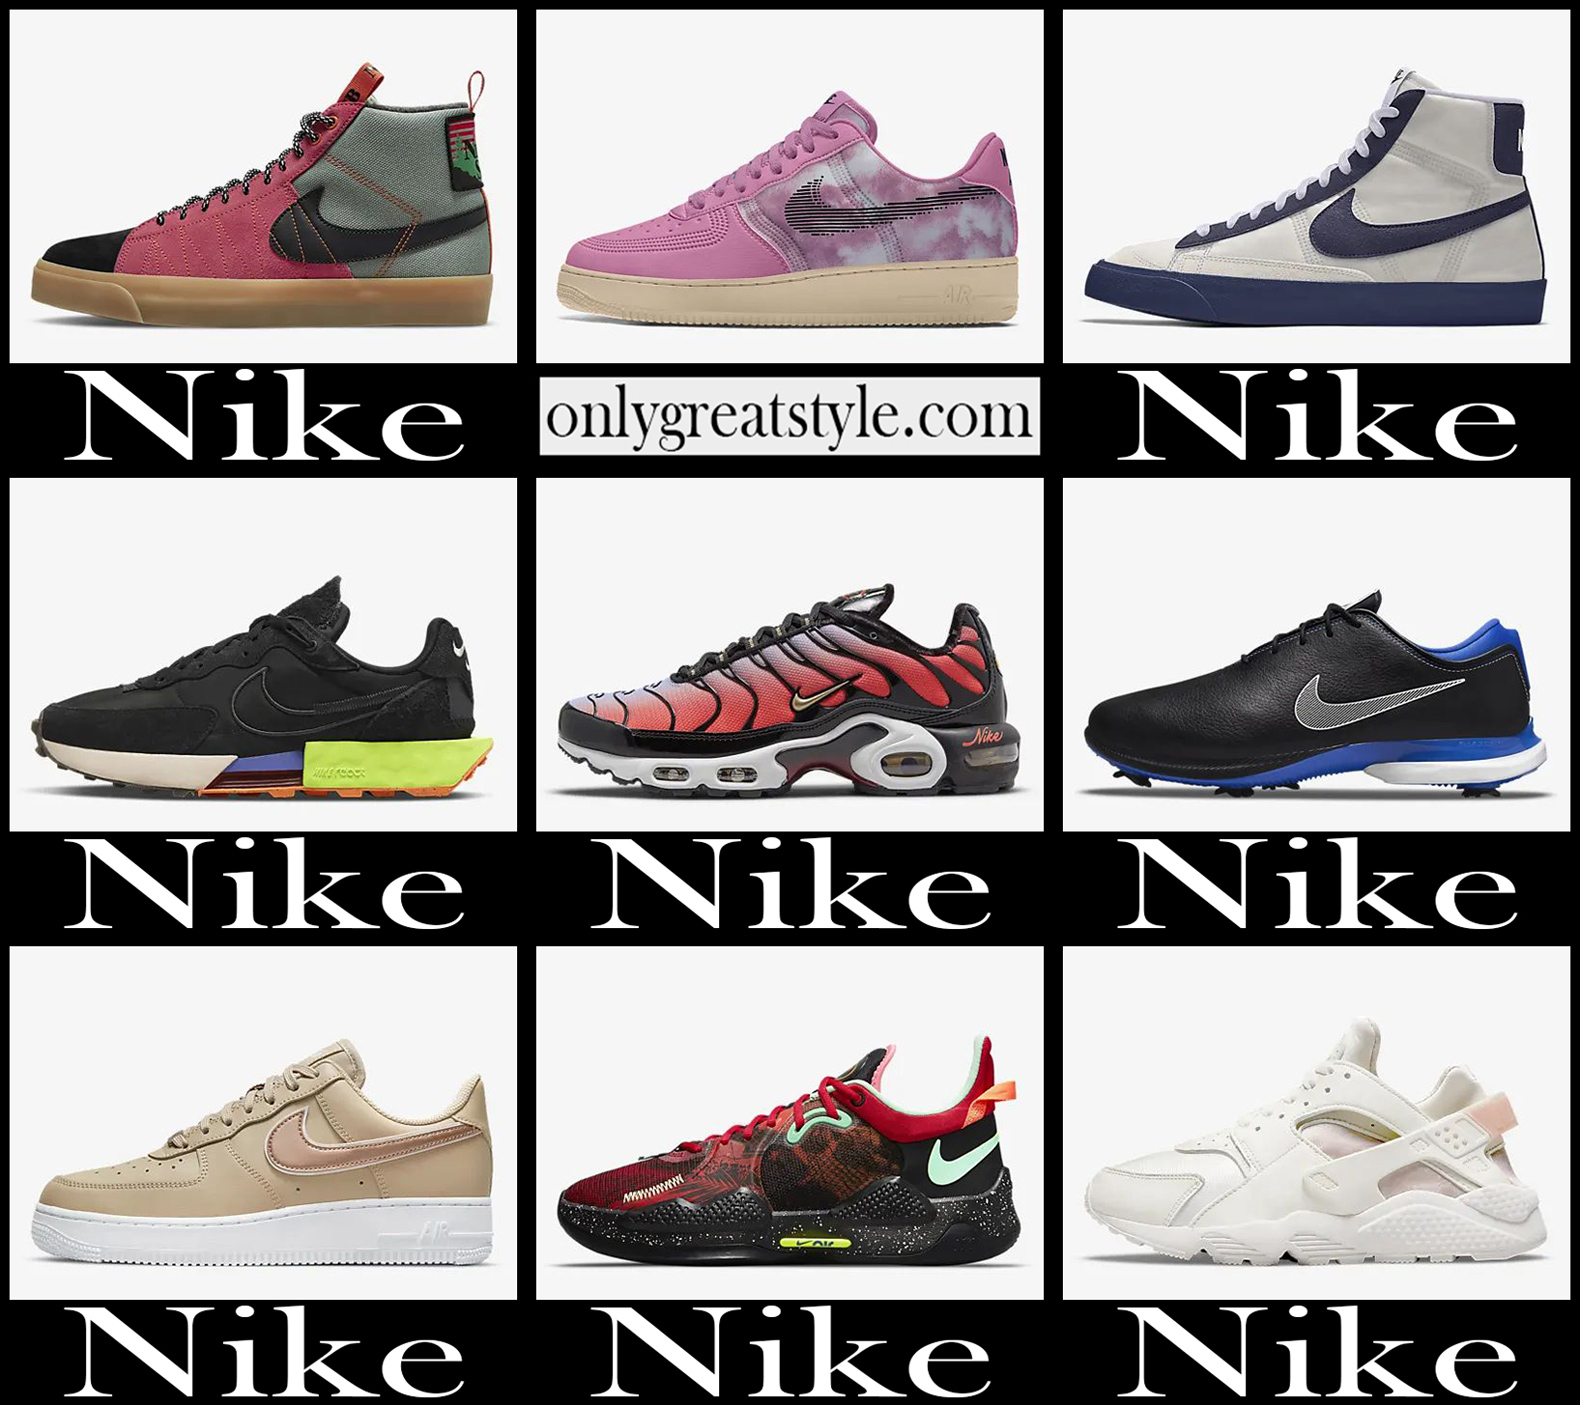 New arrivals Nike sneakers child and boy 2018 2019 fall winter